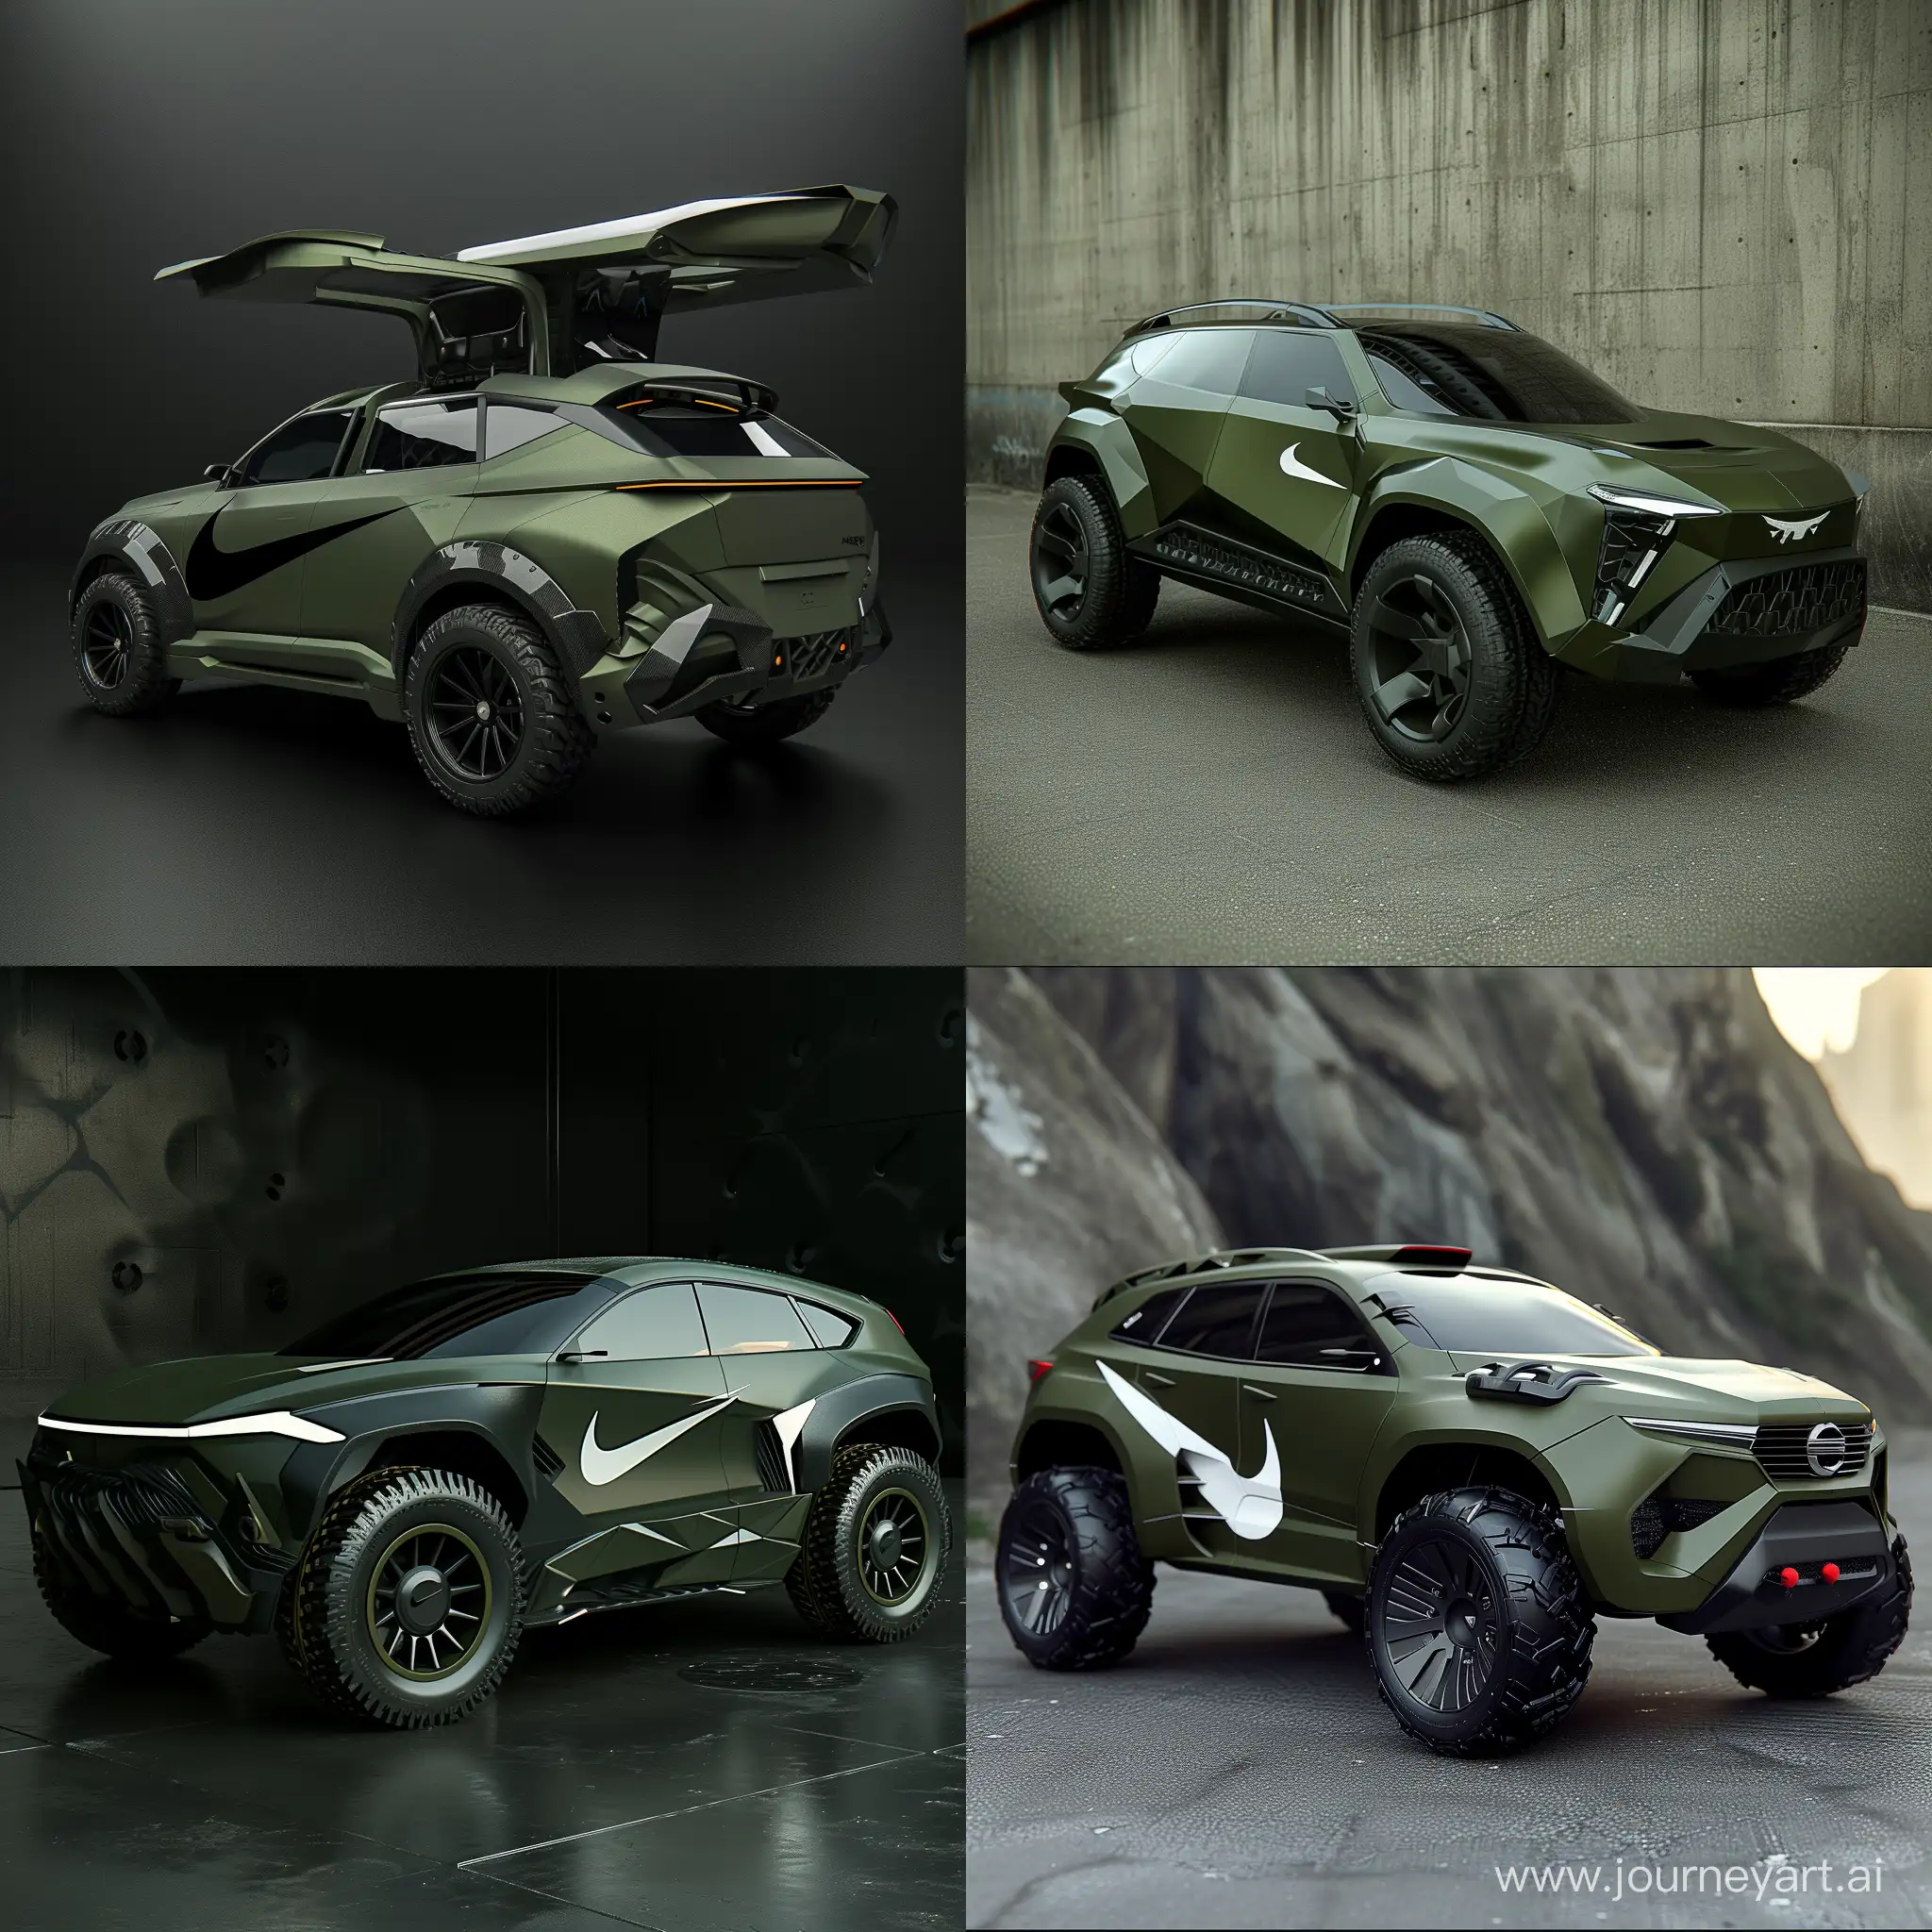 A Futuristic SUV Car Powered by Nike, Military Design, Hunter Green Theme, 3d Render, Product Photography, Hyper Realistic, High Precision